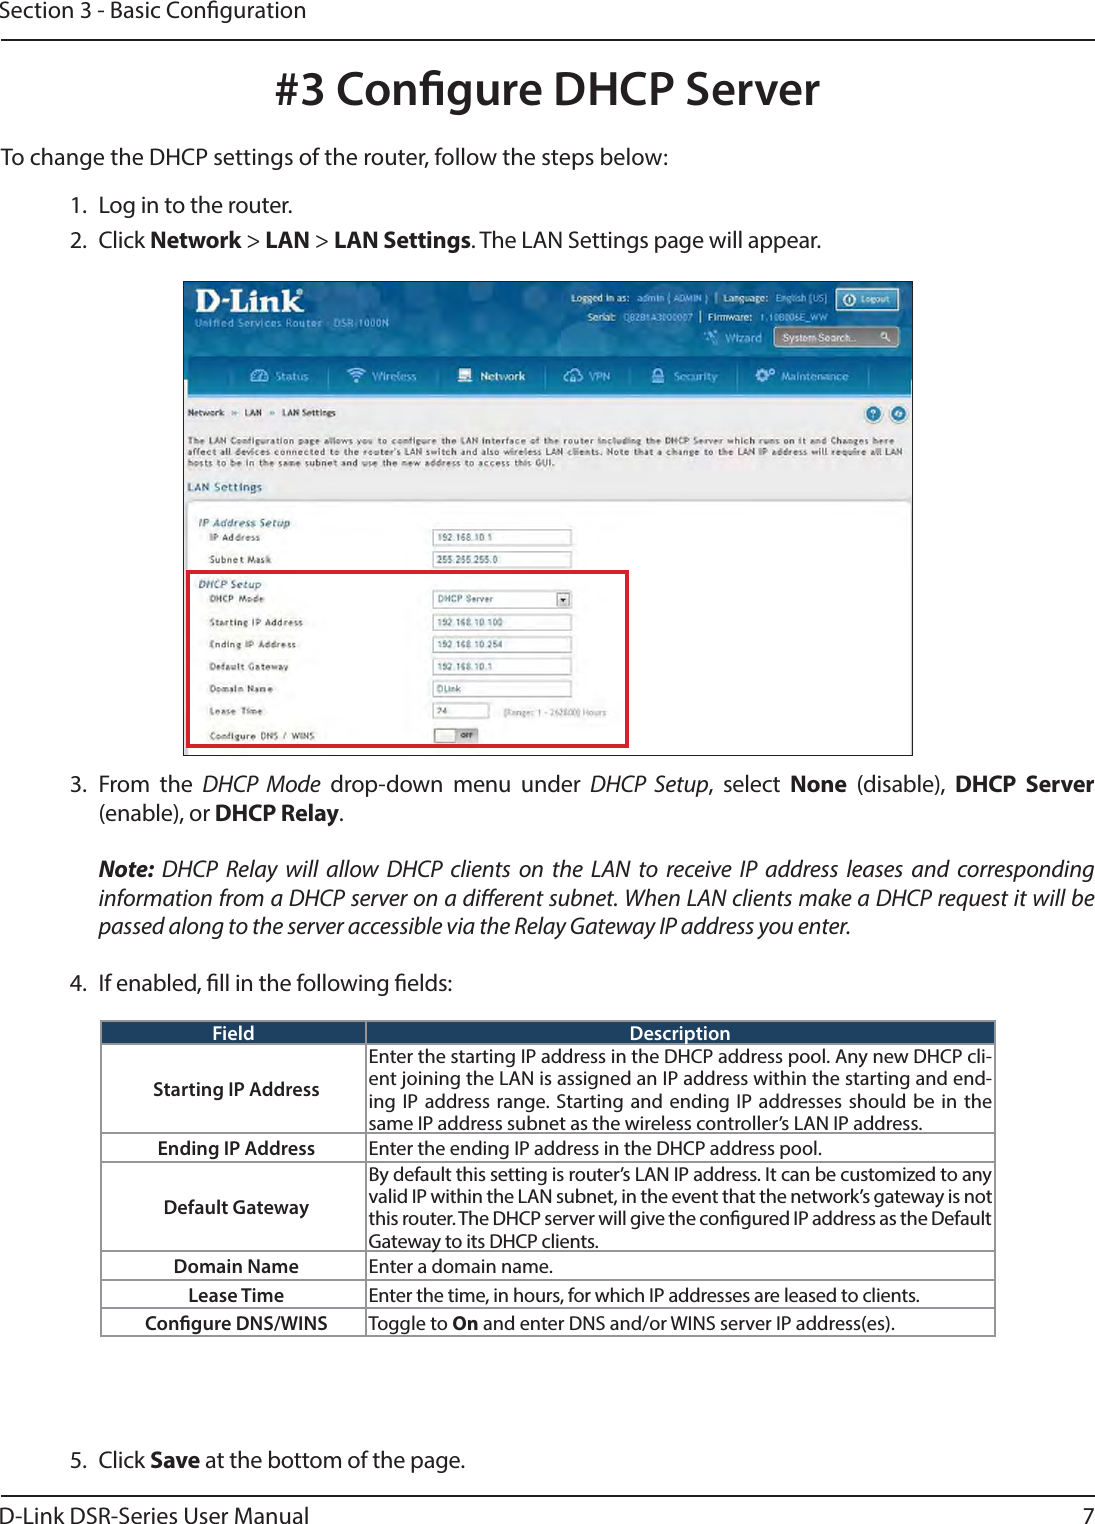 D-Link DSR-Series User Manual 7Section 3 - Basic Conguration#3 Congure DHCP Server1.  Log in to the router. 2. Click Network &gt; LAN &gt; LAN Settings. The LAN Settings page will appear.To change the DHCP settings of the router, follow the steps below:3. From the DHCP Mode drop-down menu under DHCP Setup, select None (disable), DHCP Server (enable), or DHCP Relay. Note: DHCP Relay will allow DHCP clients on the LAN to receive IP address leases and corresponding information from a DHCP server on a dierent subnet. When LAN clients make a DHCP request it will be passed along to the server accessible via the Relay Gateway IP address you enter.4.  If enabled, ll in the following elds:Field DescriptionStarting IP AddressEnter the starting IP address in the DHCP address pool. Any new DHCP cli-ent joining the LAN is assigned an IP address within the starting and end-ing IP address range. Starting and ending IP addresses should be in the same IP address subnet as the wireless controller’s LAN IP address.Ending IP Address Enter the ending IP address in the DHCP address pool.Default GatewayBy default this setting is router’s LAN IP address. It can be customized to any valid IP within the LAN subnet, in the event that the network’s gateway is not this router. The DHCP server will give the congured IP address as the Default Gateway to its DHCP clients.Domain Name Enter a domain name.Lease Time Enter the time, in hours, for which IP addresses are leased to clients.Congure DNS/WINS Toggle to On and enter DNS and/or WINS server IP address(es).5. Click Save at the bottom of the page.